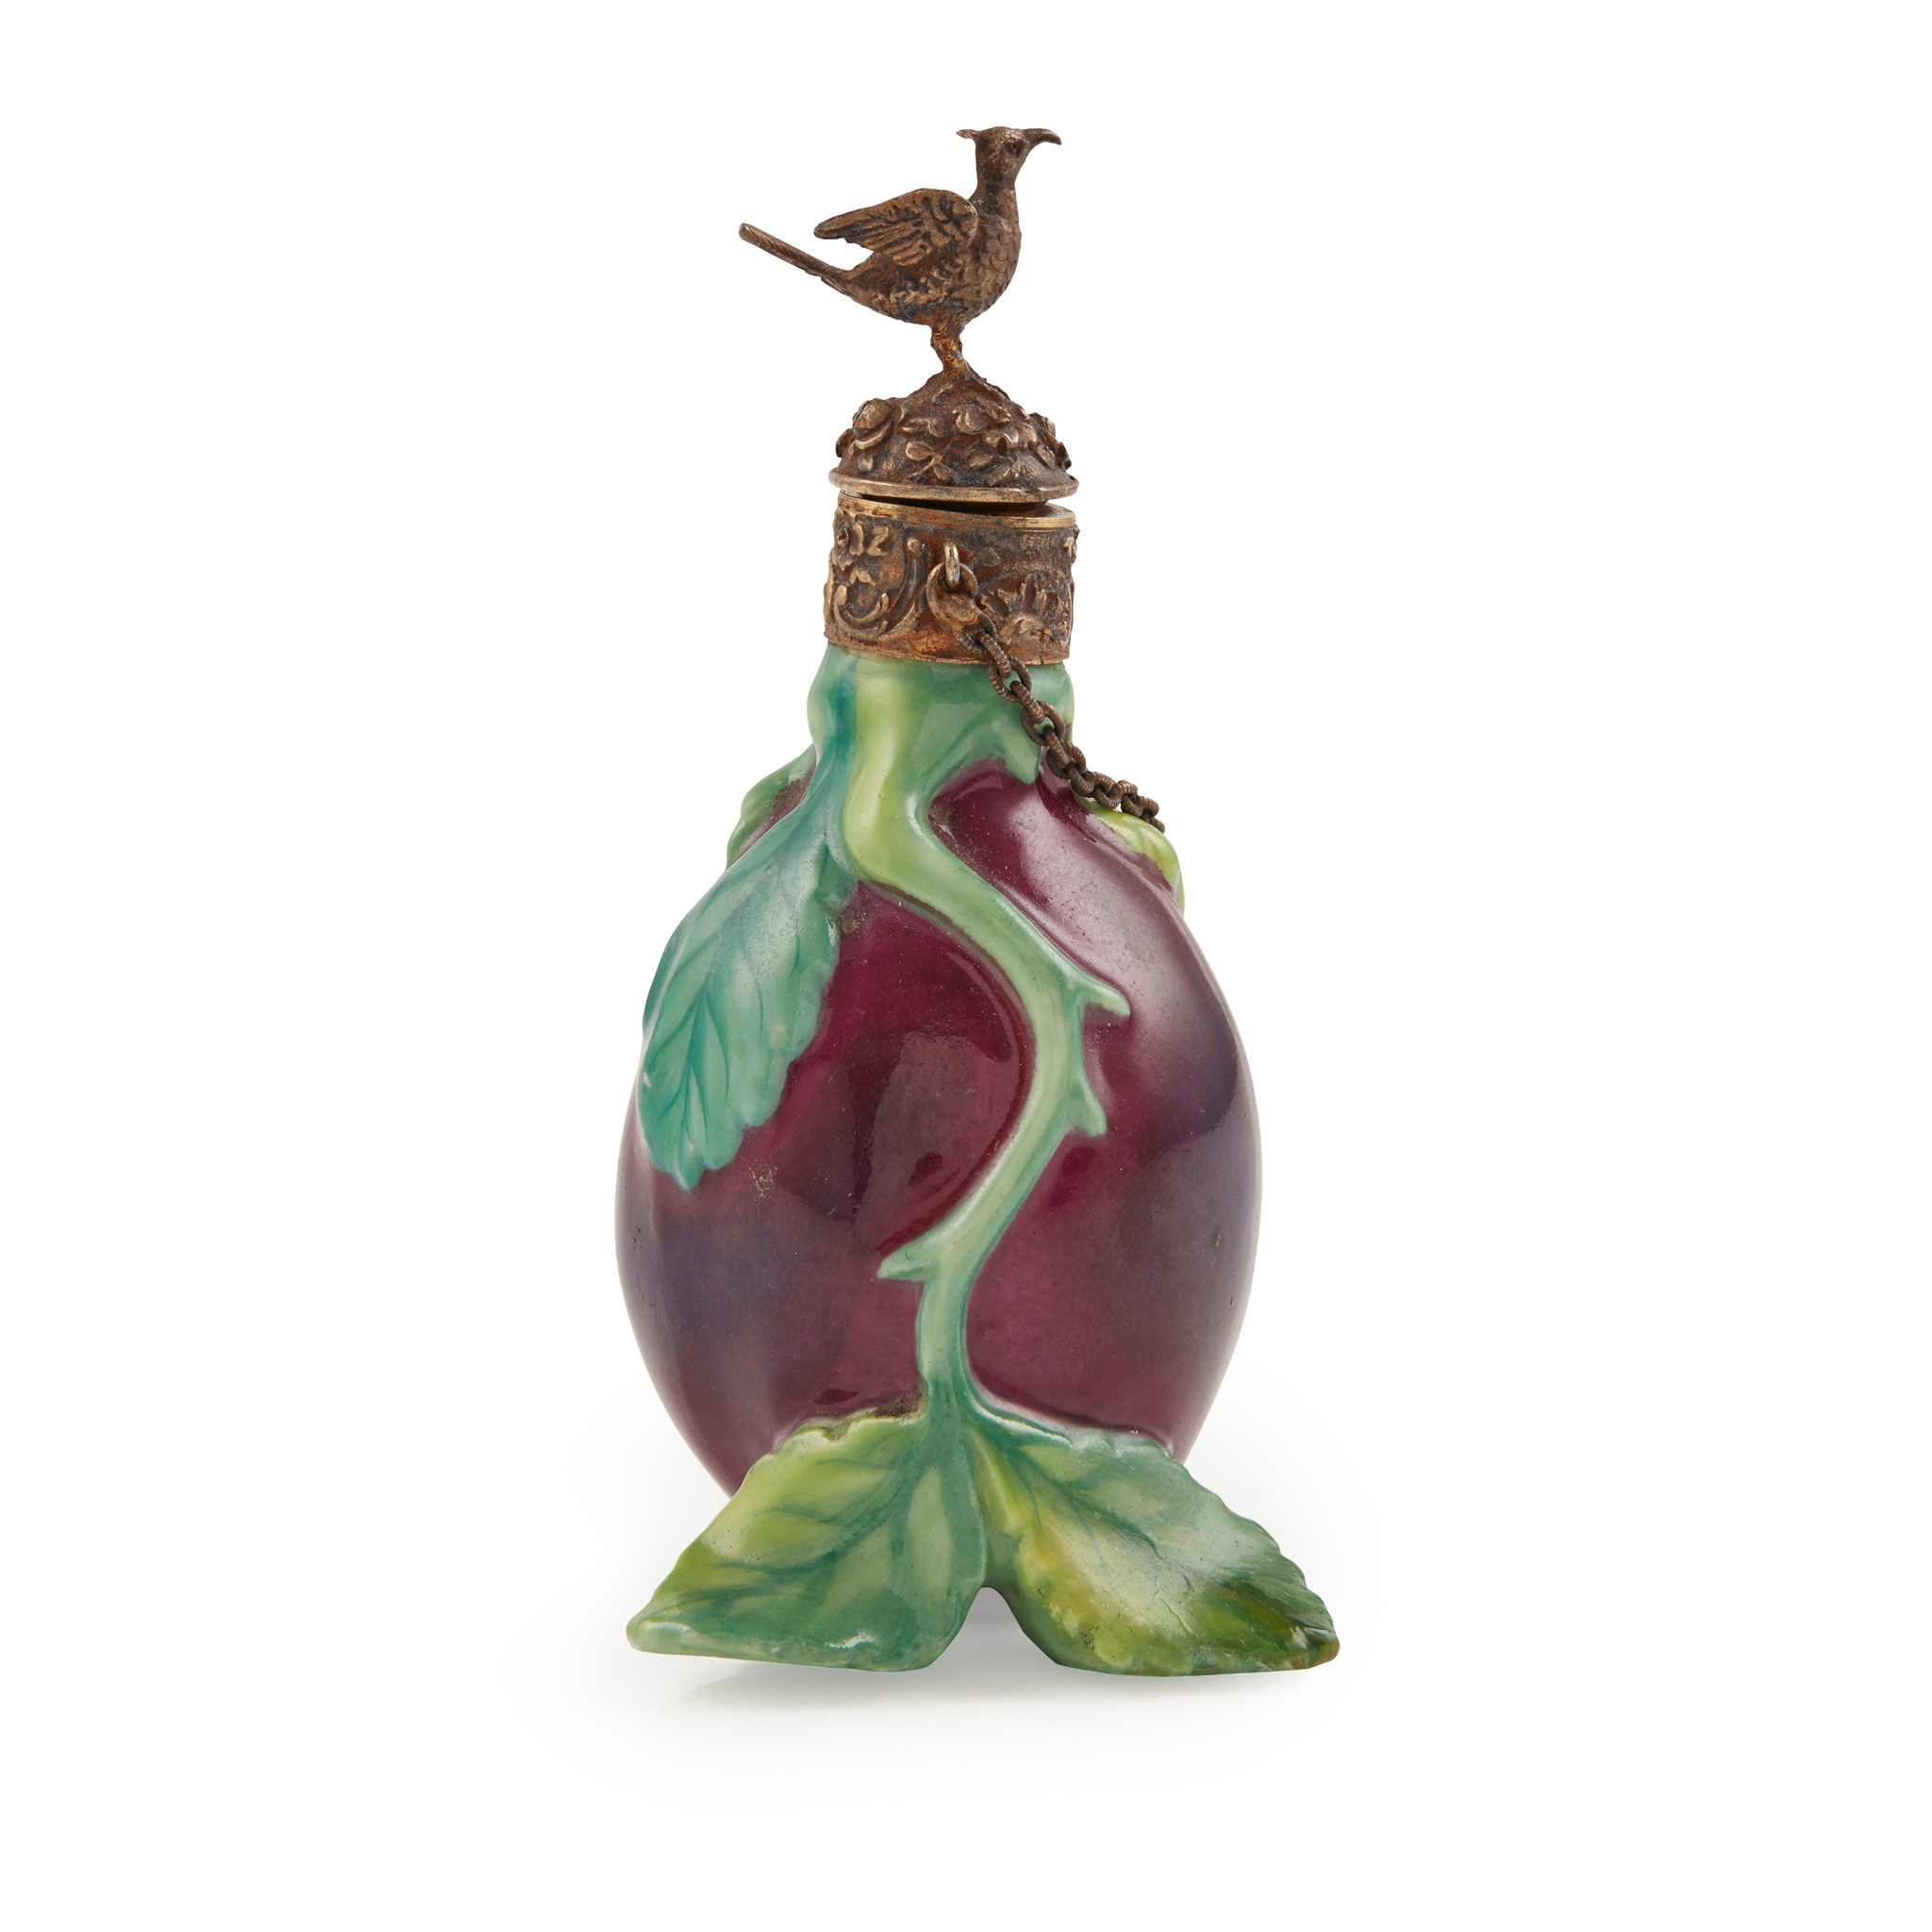 CONTINENTAL PORCELAIN SCENT BOTTLE 19TH CENTURY - Image 3 of 3